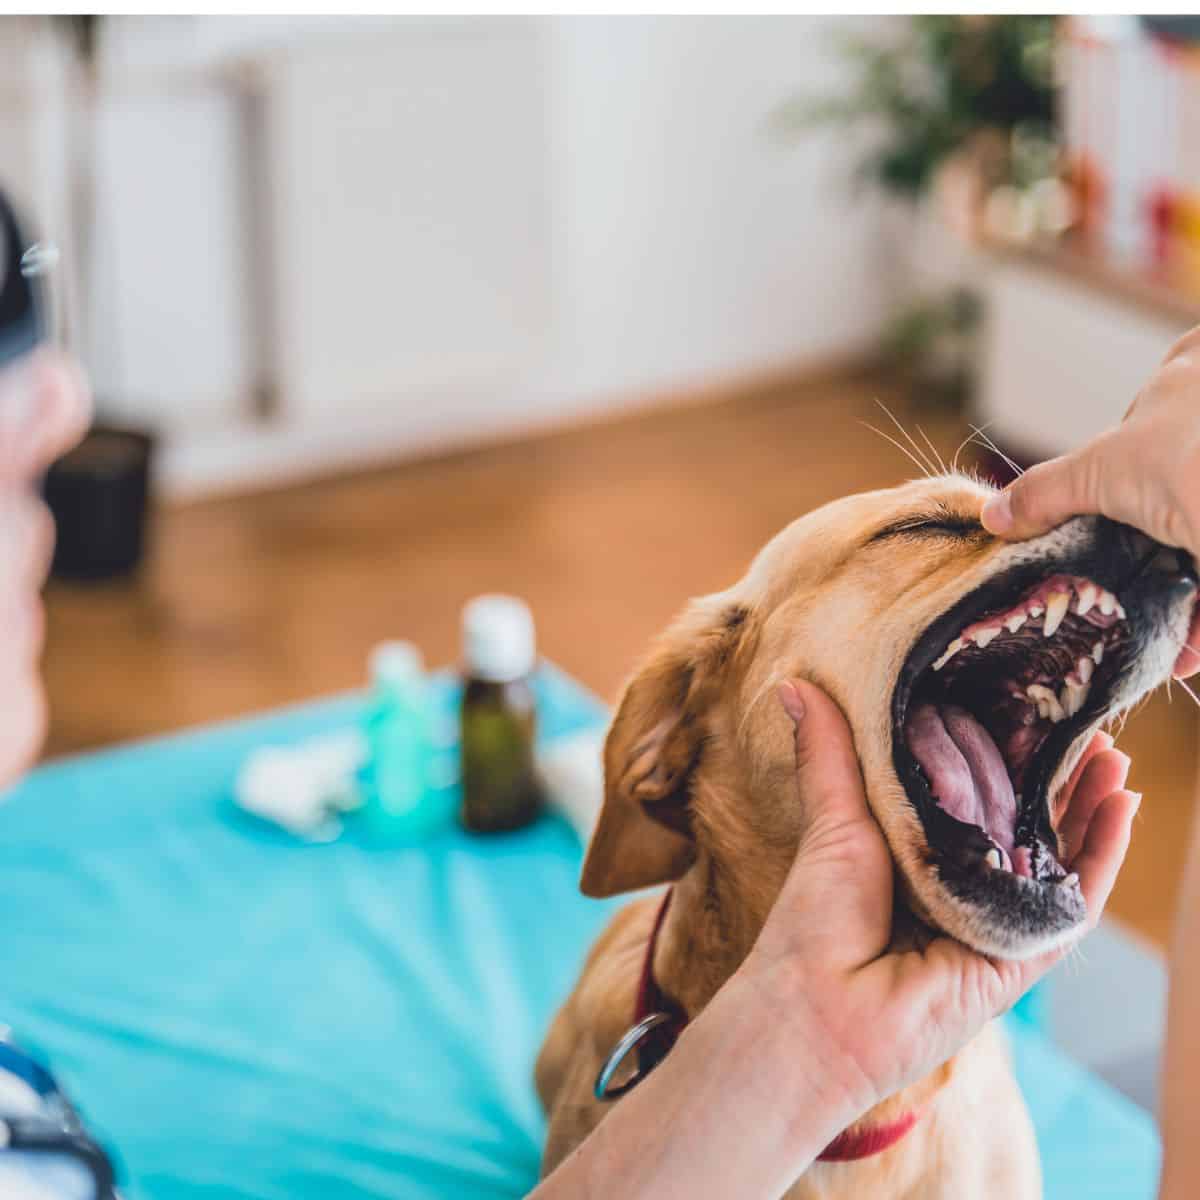 Person inspecting a dog's teeth with a blue blanket and vet supplies in the background.